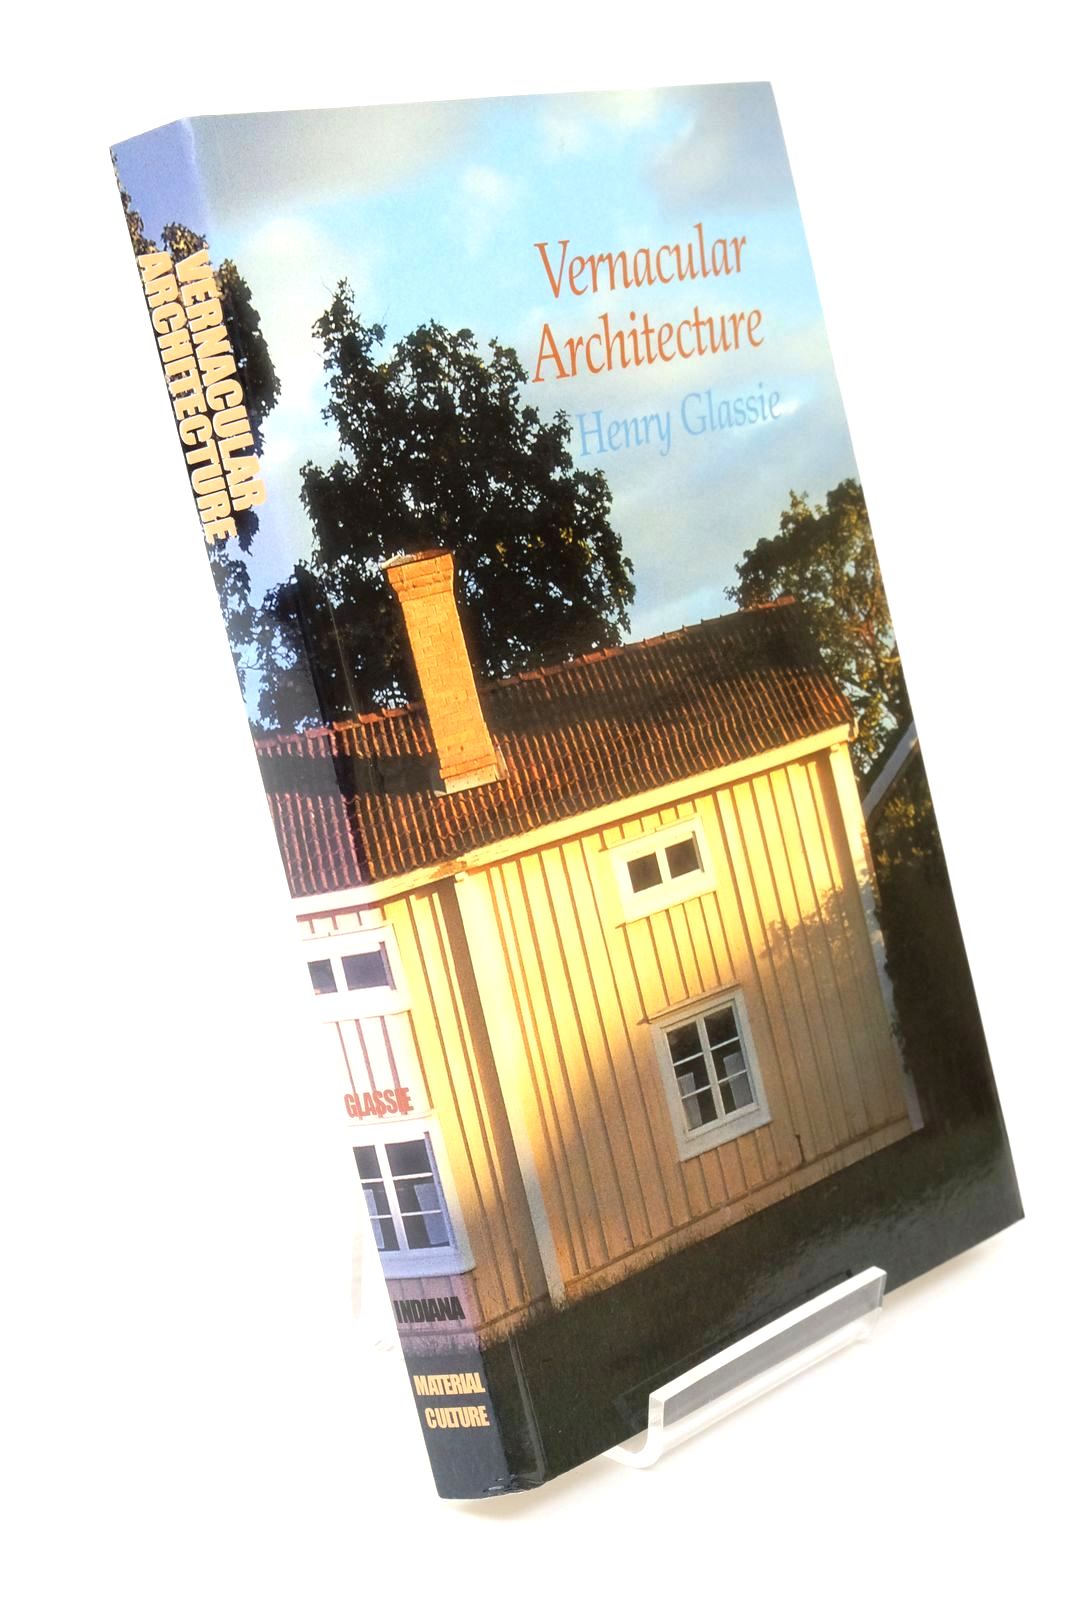 Photo of VERNACULAR ARCHITECTURE written by Glassie, Henry published by Indiana University Press, Material Culture (STOCK CODE: 1322502)  for sale by Stella & Rose's Books